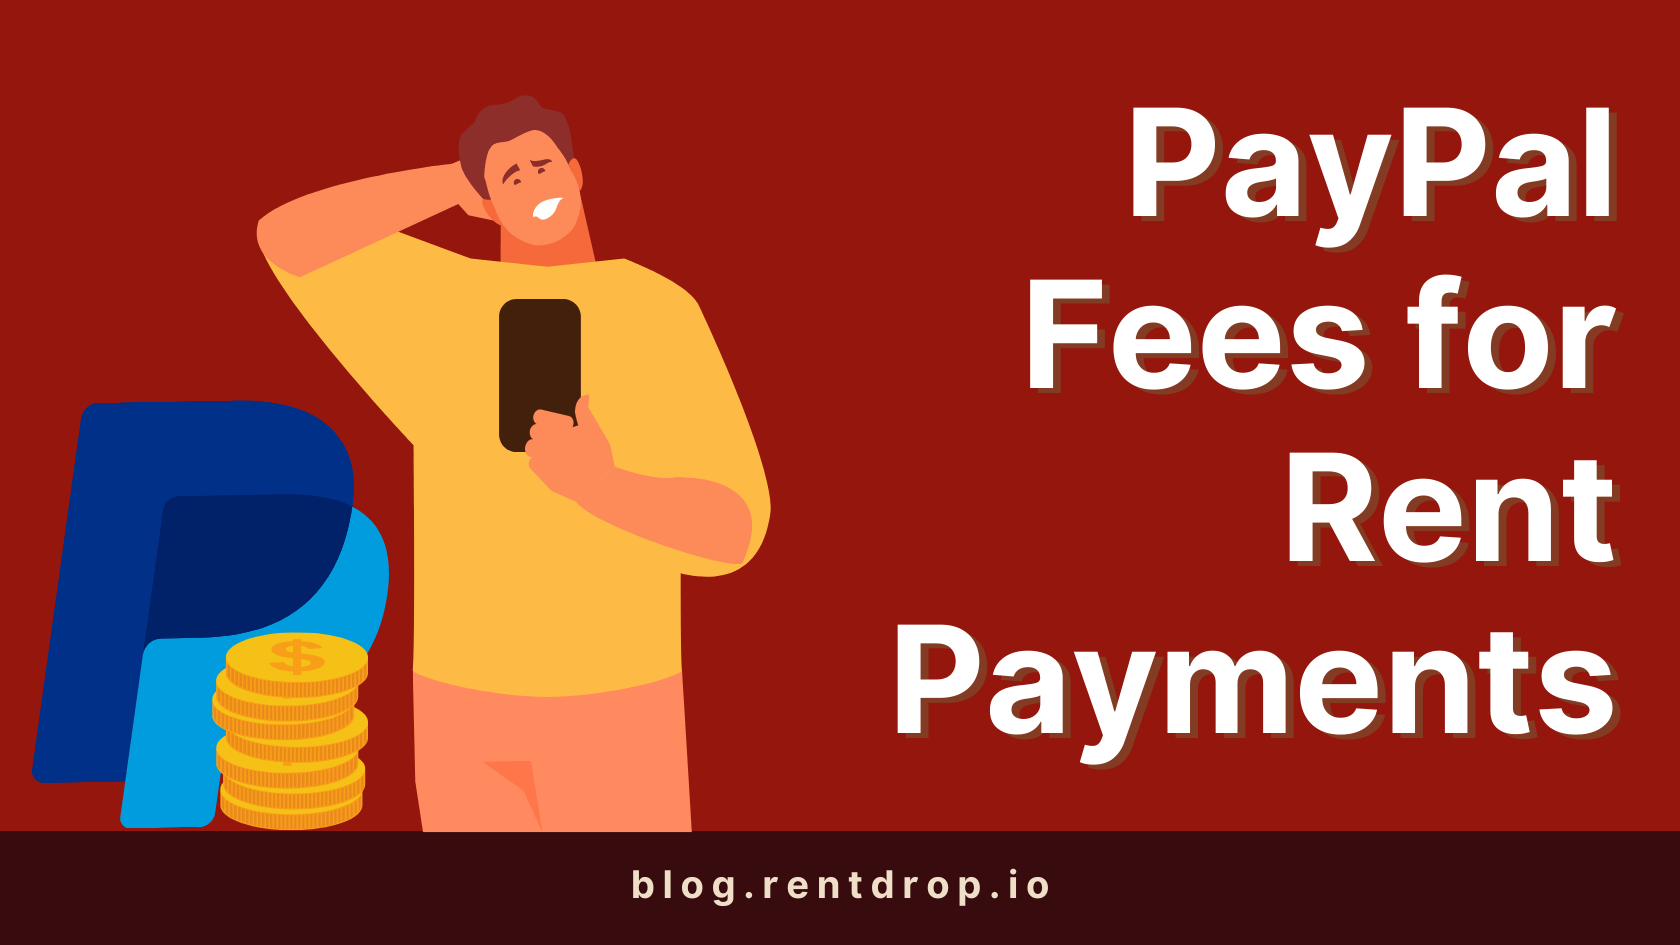 paypal fees for rent payments rentdrop hero